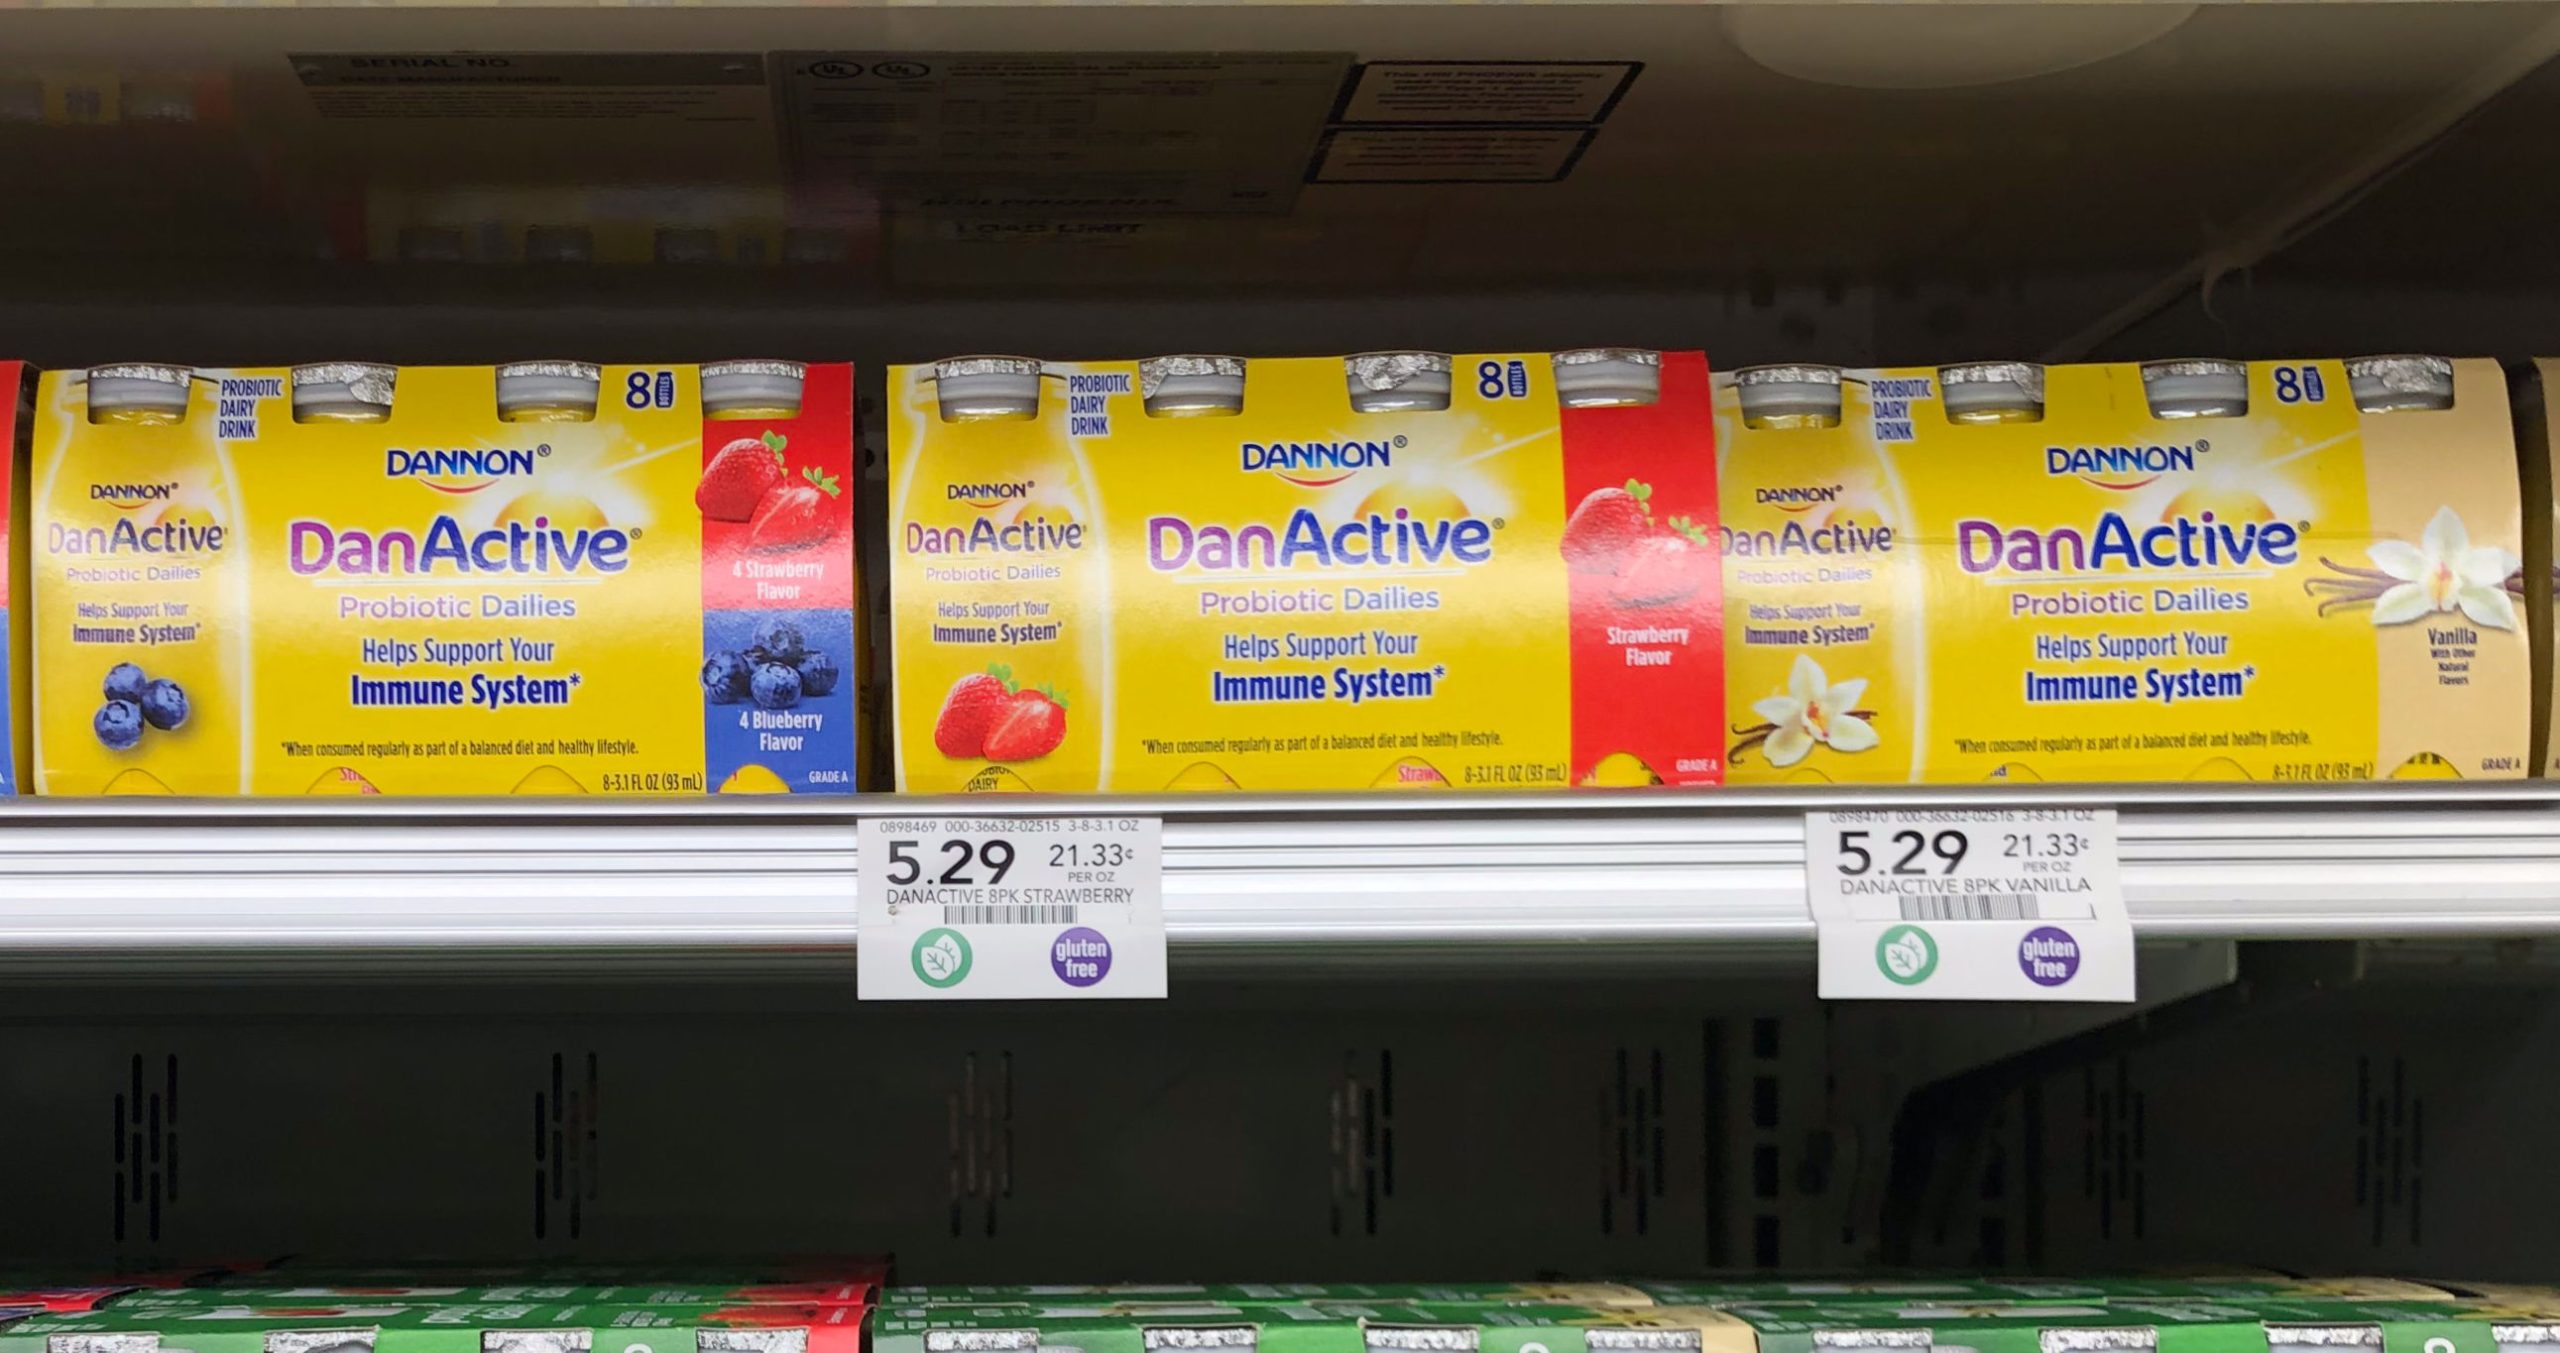 Start Your Day With Delicious DanActive Probiotic Drink & Save At Publix on I Heart Publix